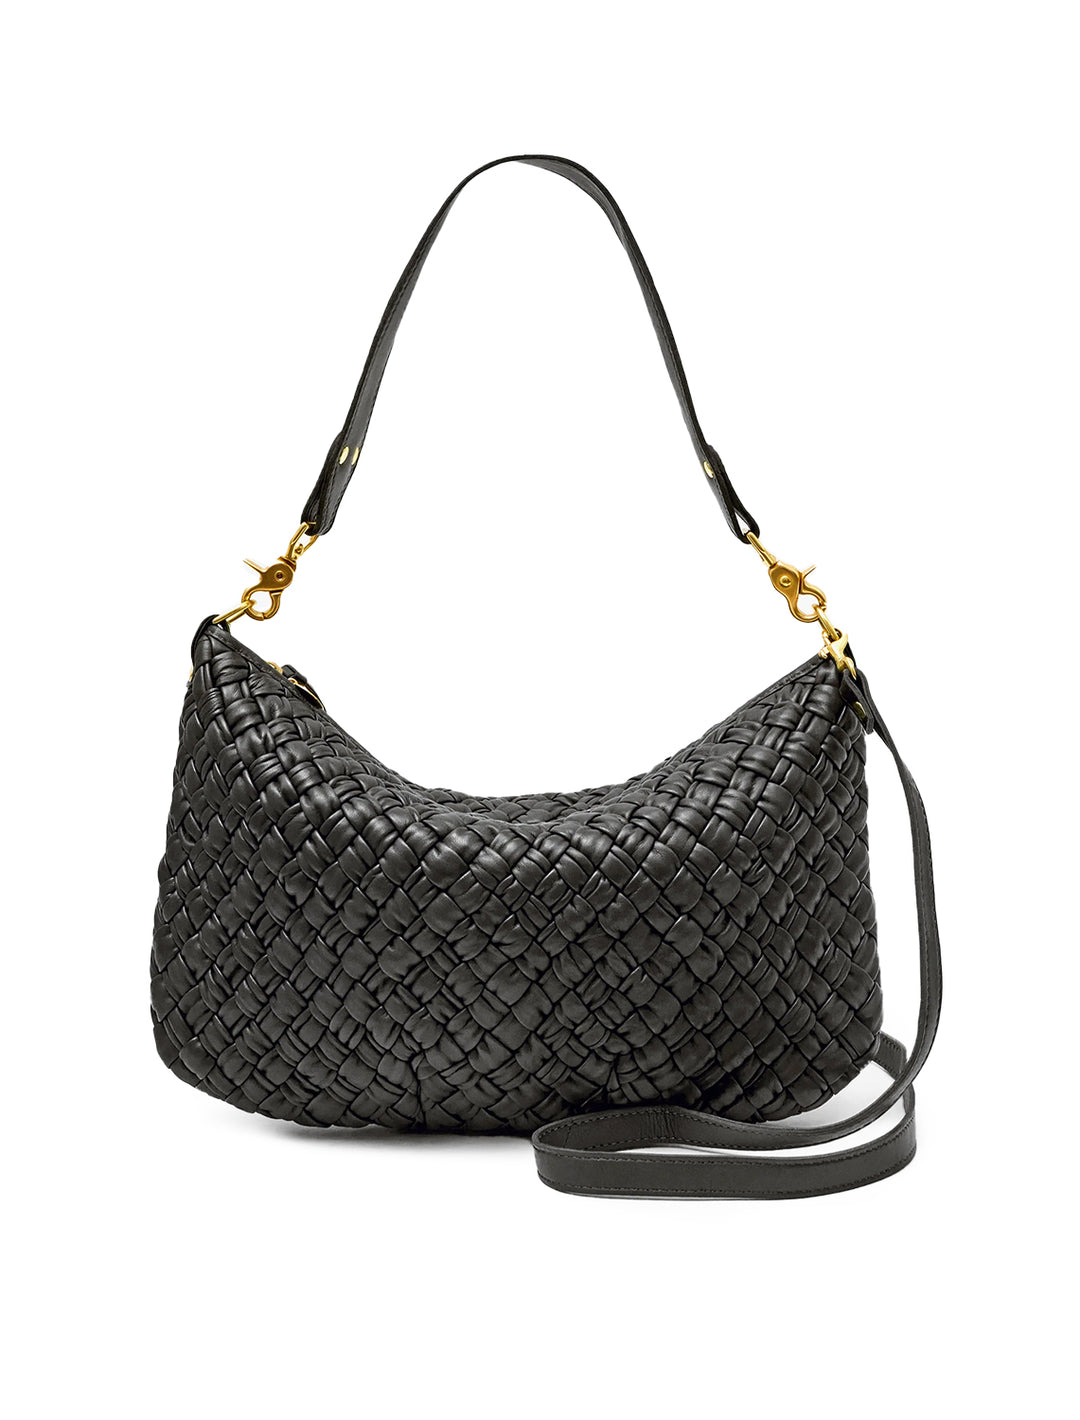 Front view of Clare V.'s moyen messenger in black puffy woven.